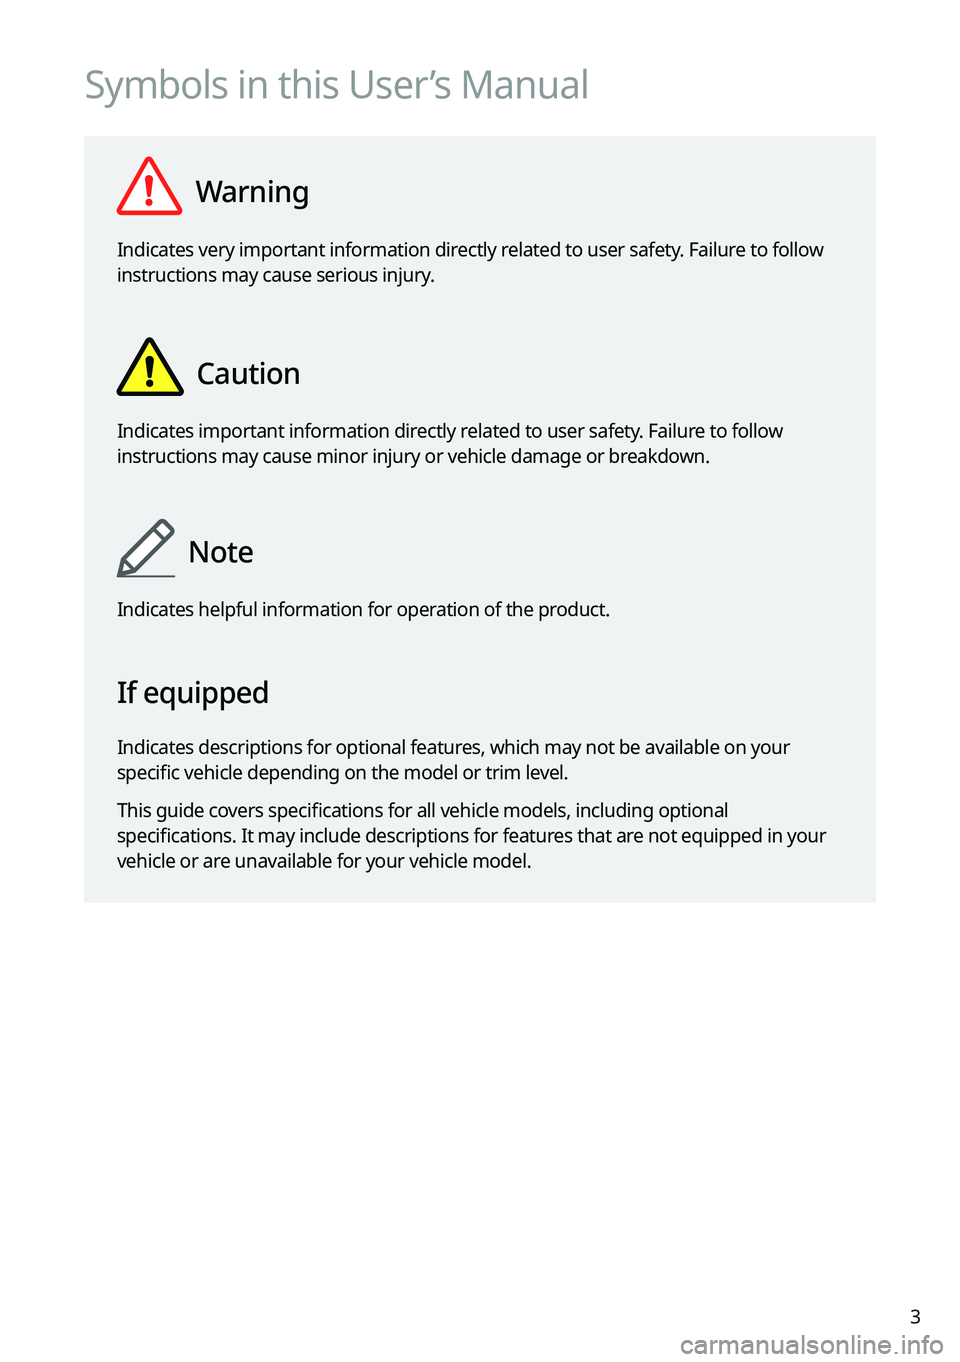 KIA SOUL 2022  Navigation System Quick Reference Guide 3
Symbols in this User’s Manual
  Warning
Indicates very important information directly related to user safety. Failure to follow 
instructions may cause serious injury.
  Caution
Indicates importan